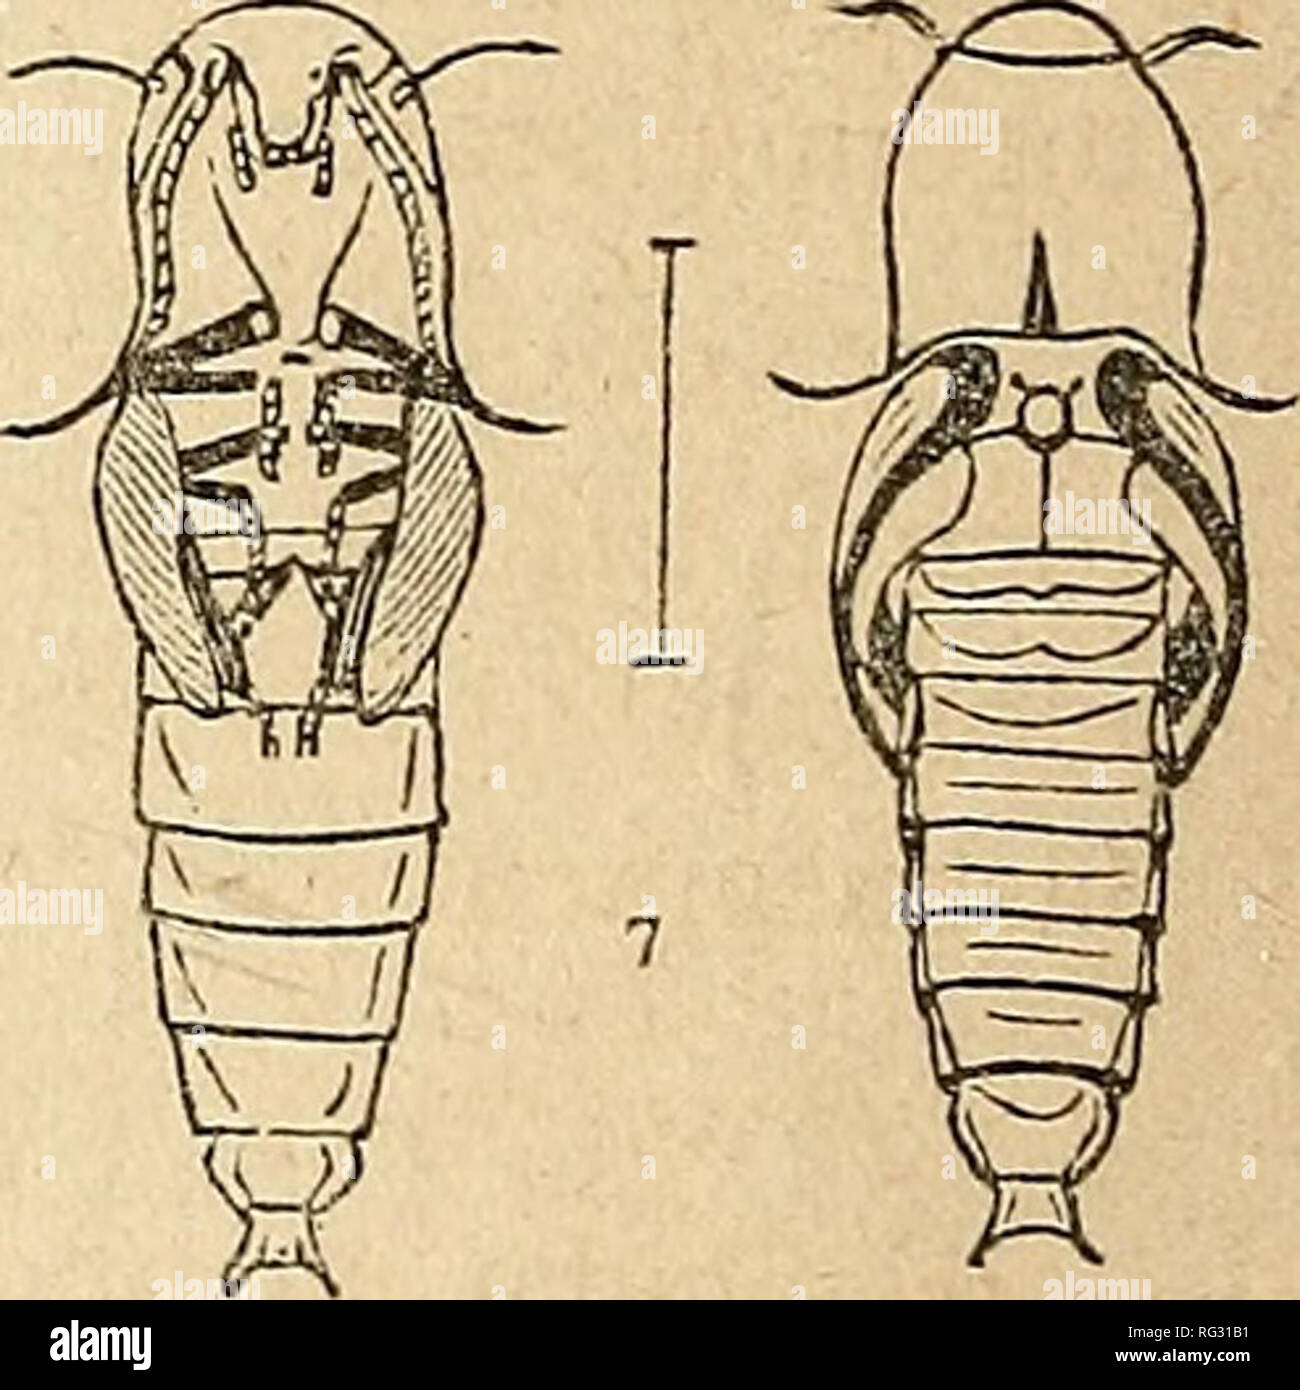 . The Canadian entomologist. Insects. ^-^. 1. Larva much magnified, (natural size I ) la. Transverse section. 2. Under-side of head and first three or thoracic segments, showing the parts of mouth and tlie position of first spiracle. 3. Margin of front; a Position of antennw. 4. Mandible. 5. Leg. 6. Terminal segment beneath. 7. Pupa, upper and under view. The line between represents the natural size. LARVA (Fig. I.) Form.—Elongate subcylindrical, dorsal surface more convex. Tegument.—Partially corneous, colour testaceous.. Please note that these images are extracted from scanned page images th Stock Photo